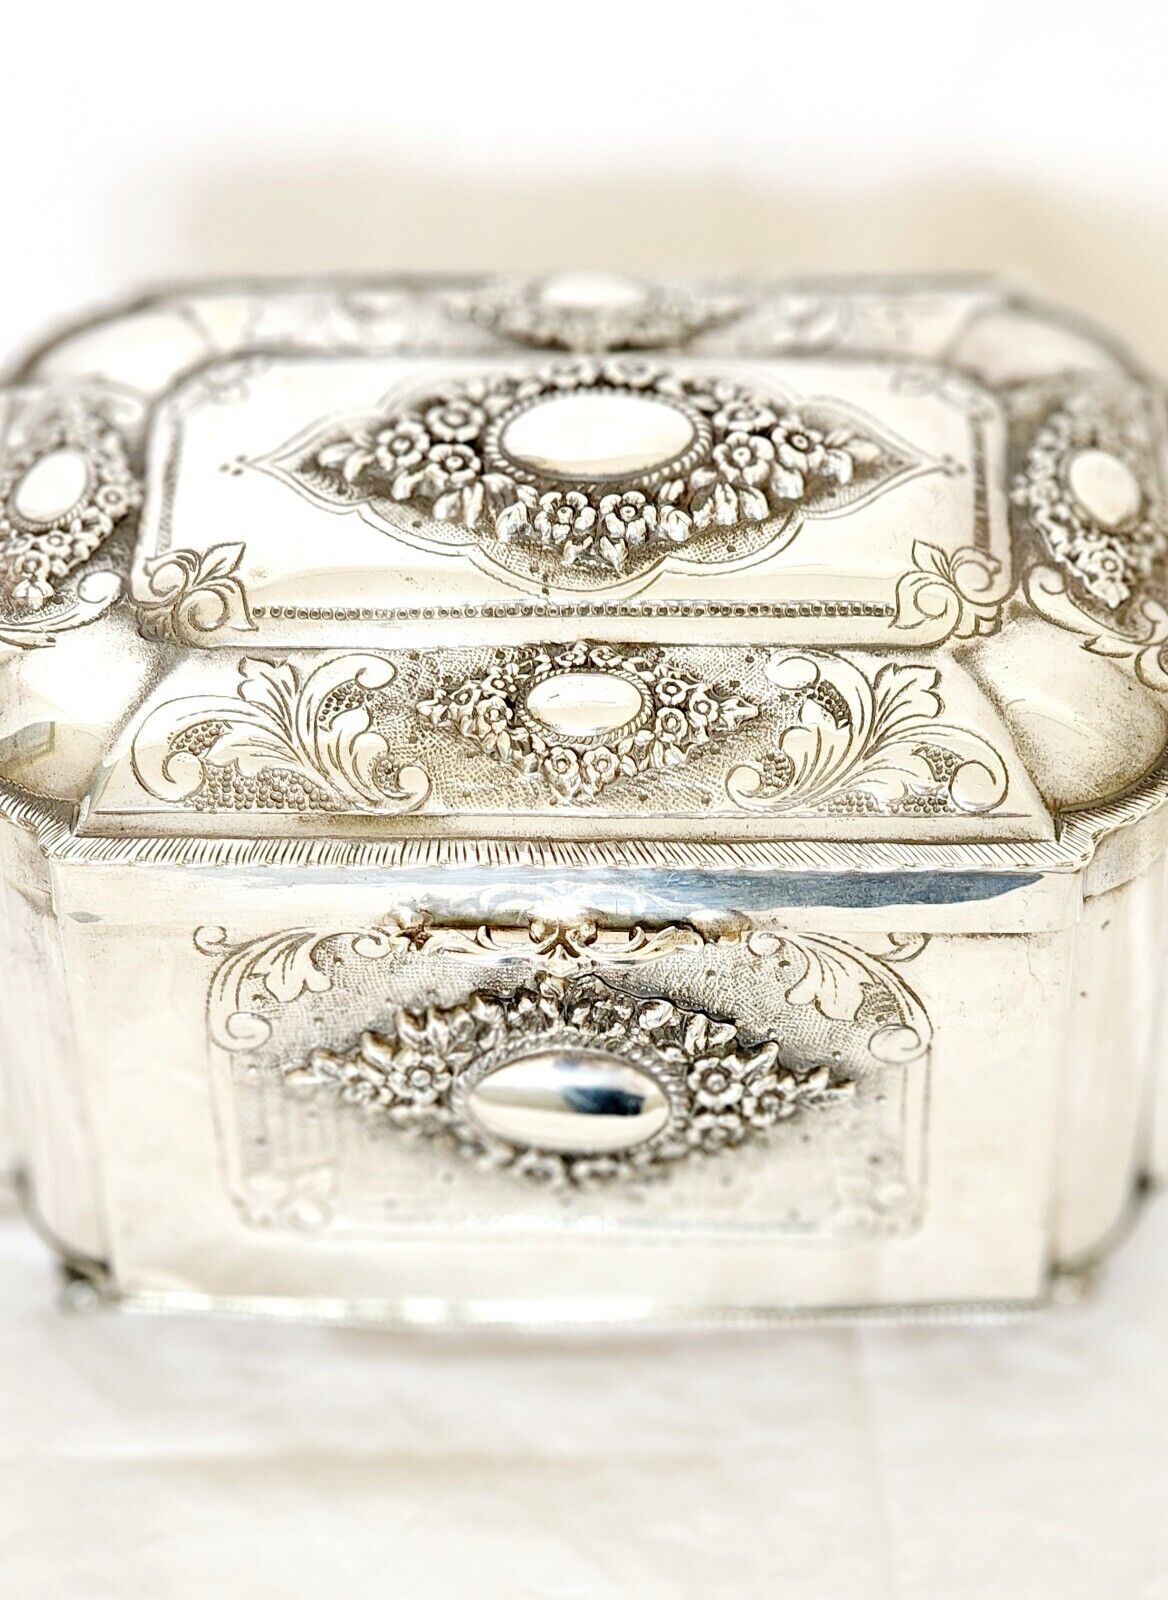 Ethrog Box Judaica Sterling Silver 925 Exquisite Vintage Made In Israel 1950s